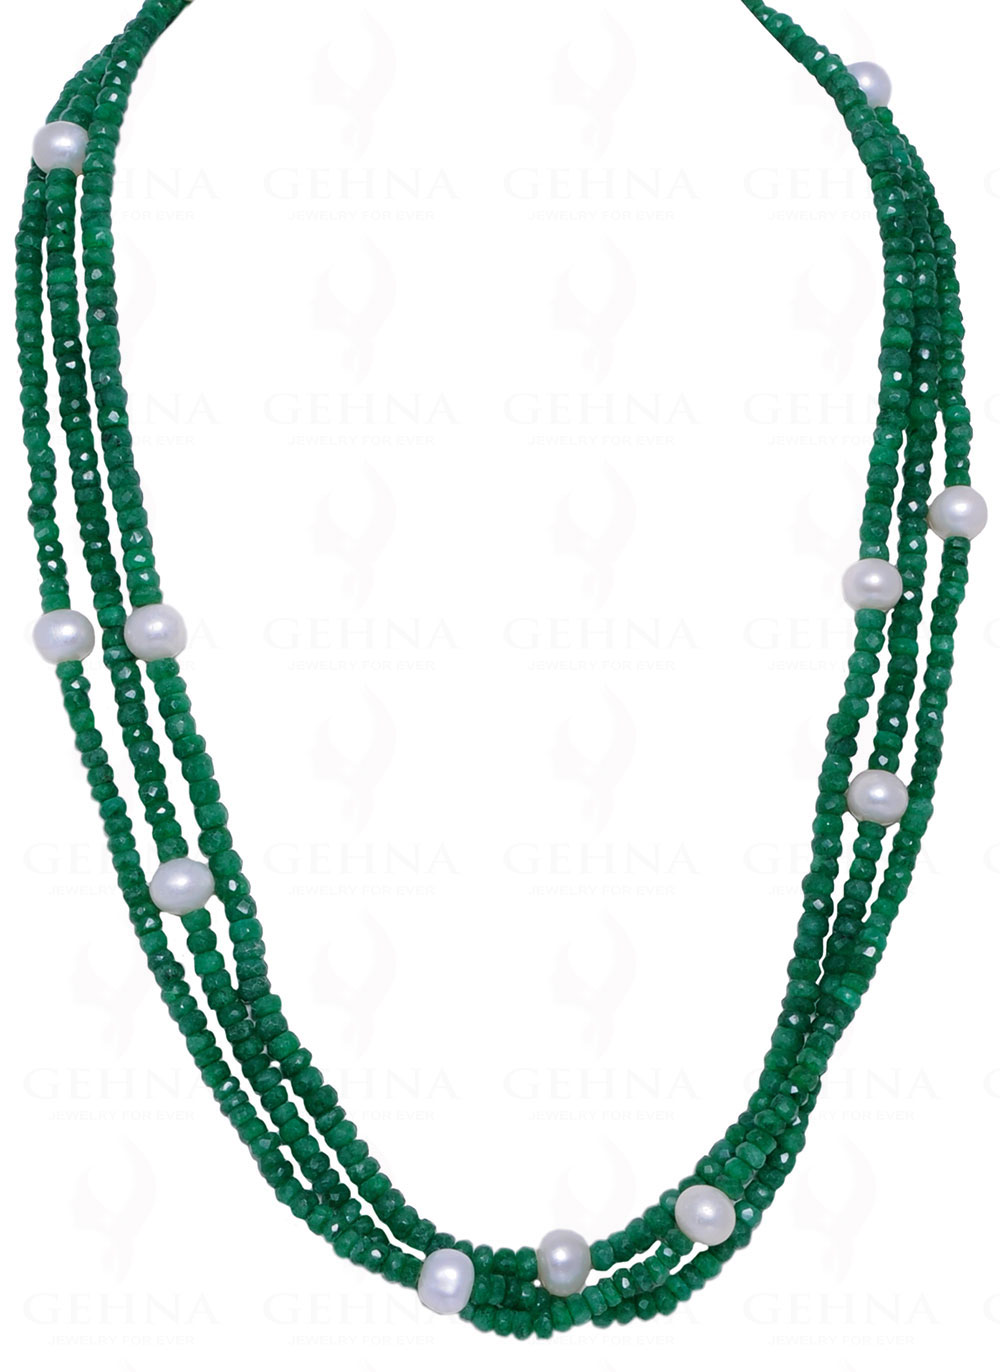 62" Inches Long Pearl & Emerald Gemstone Bead Necklace NM-1003